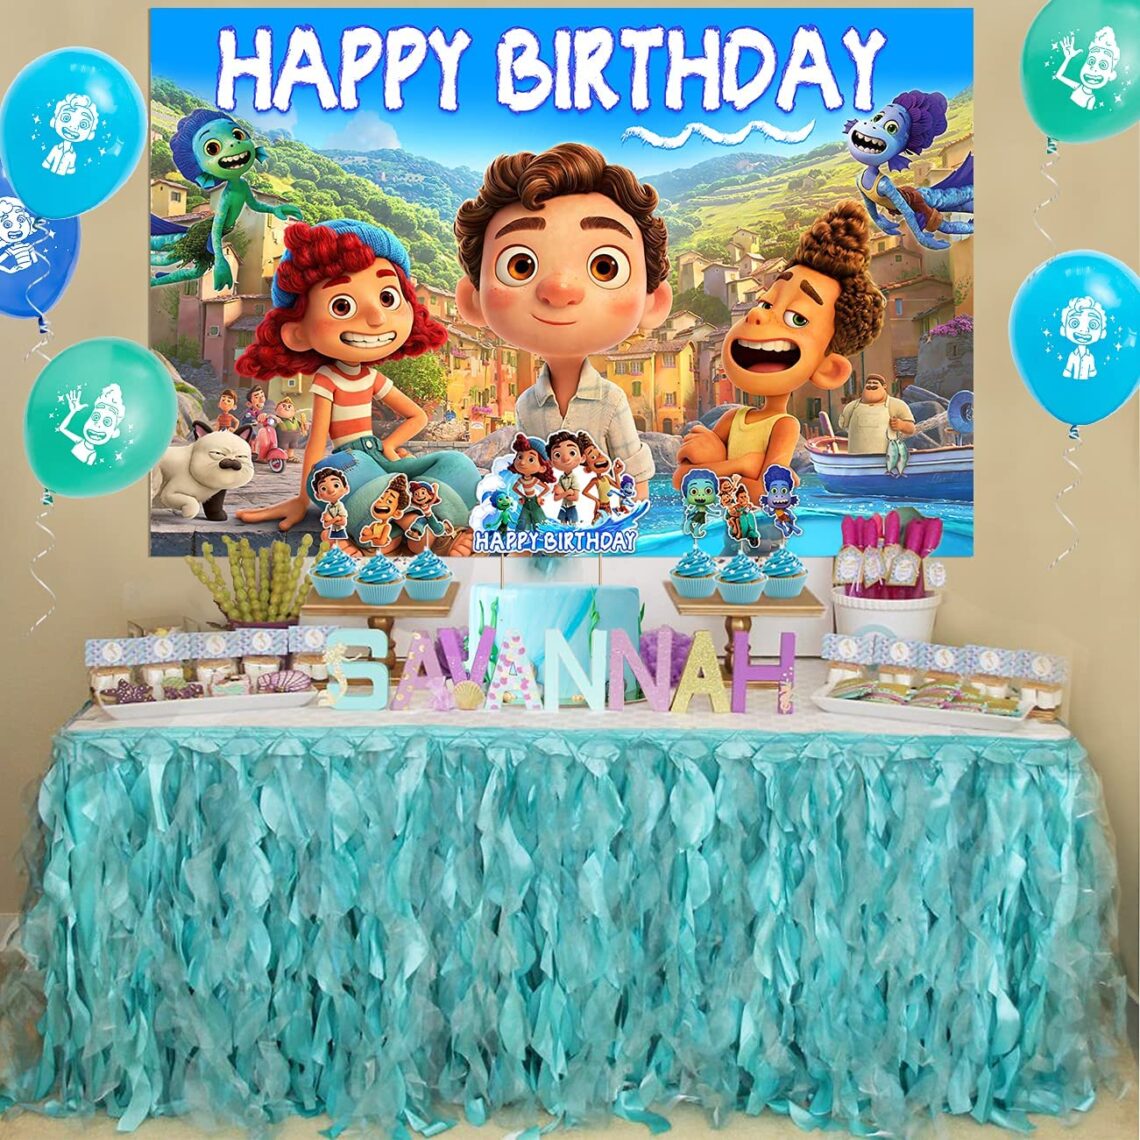 Disney Luca Party Decorations (Credit: AliExpress)